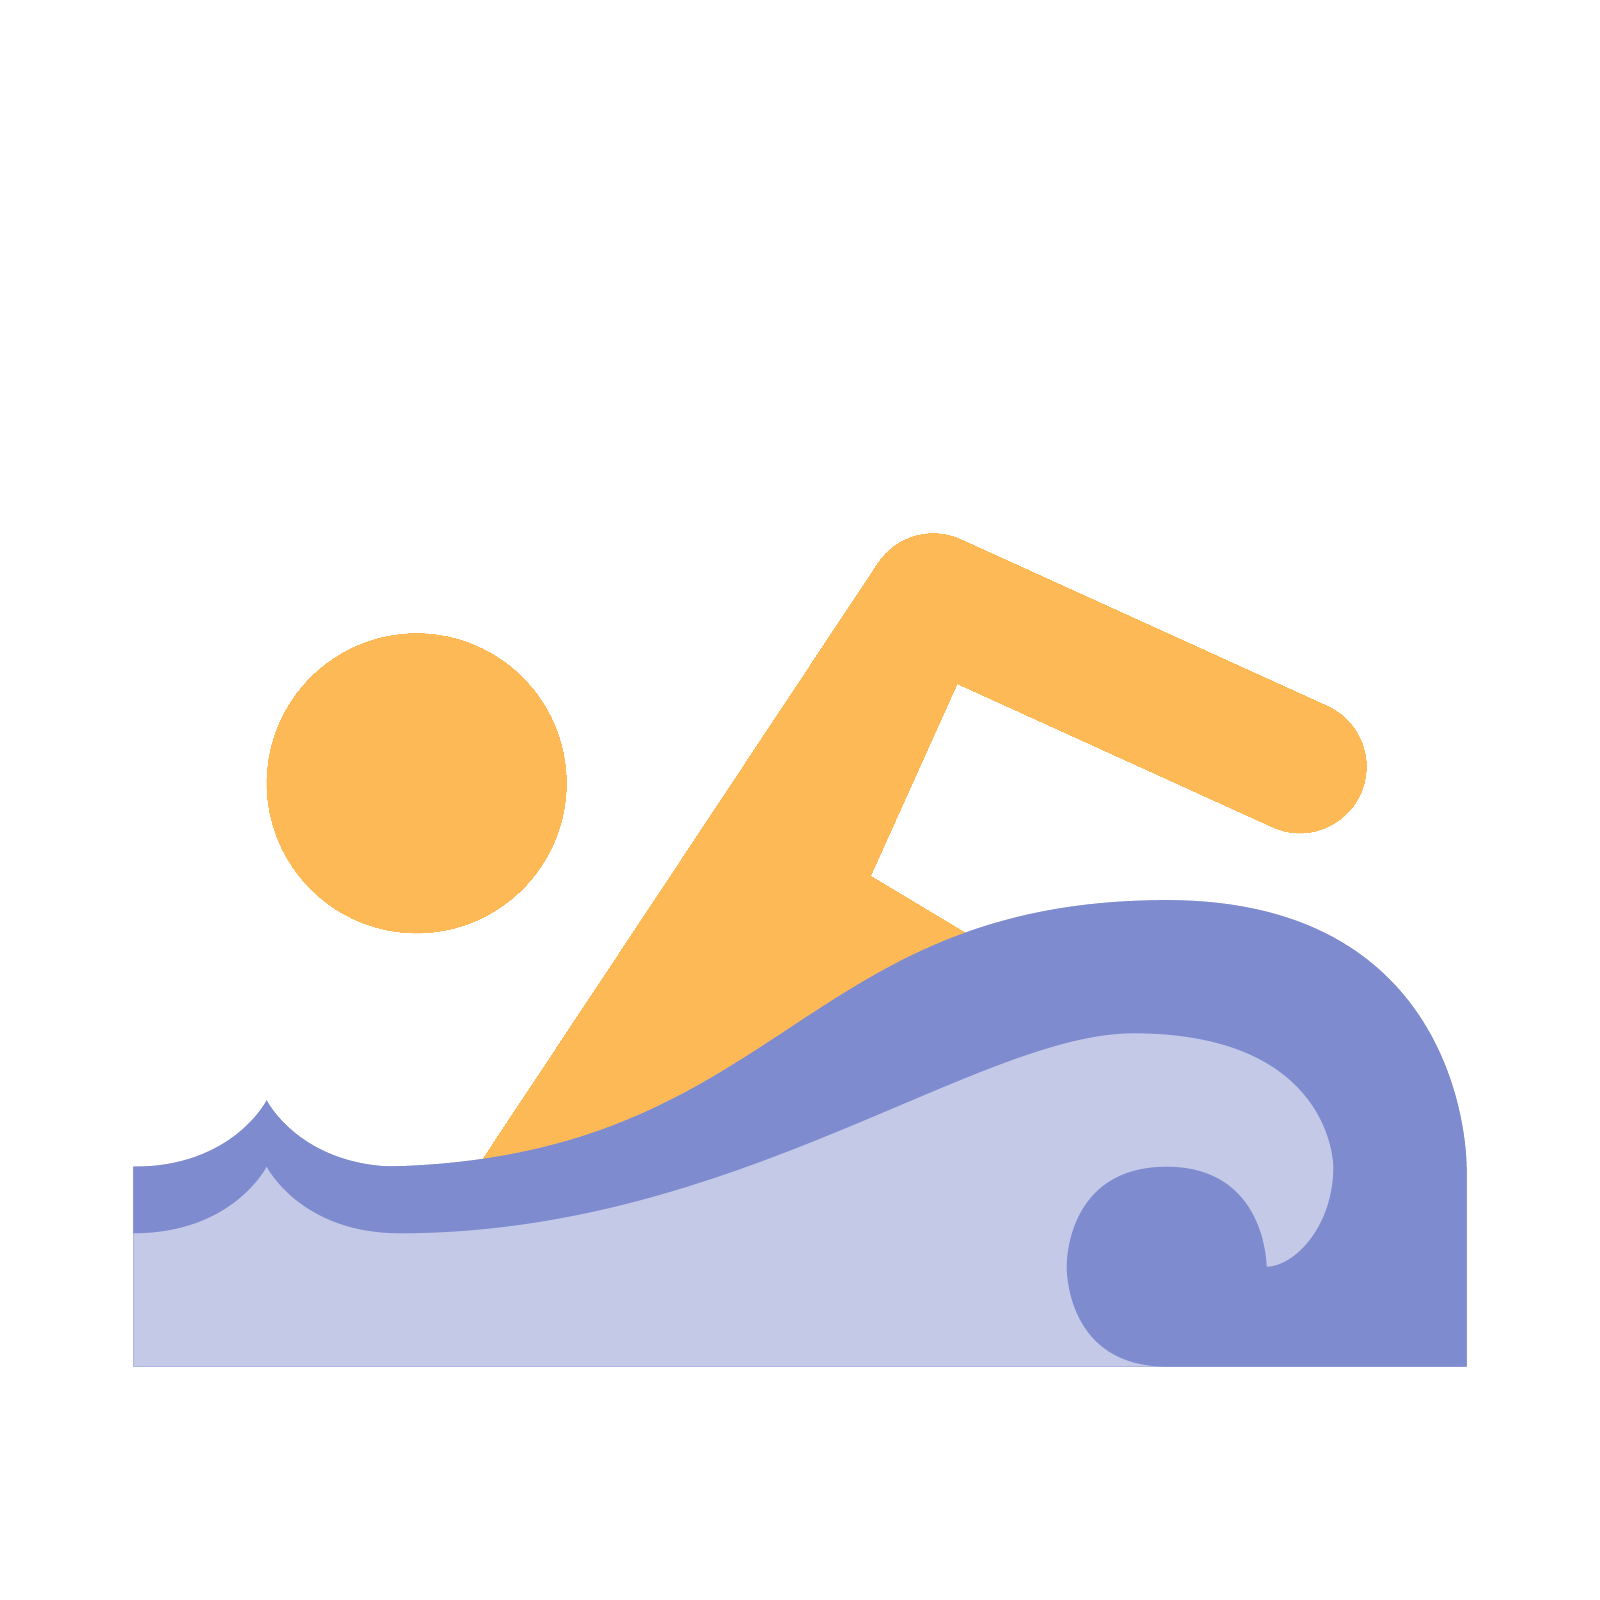 swimmer clipart swimming style